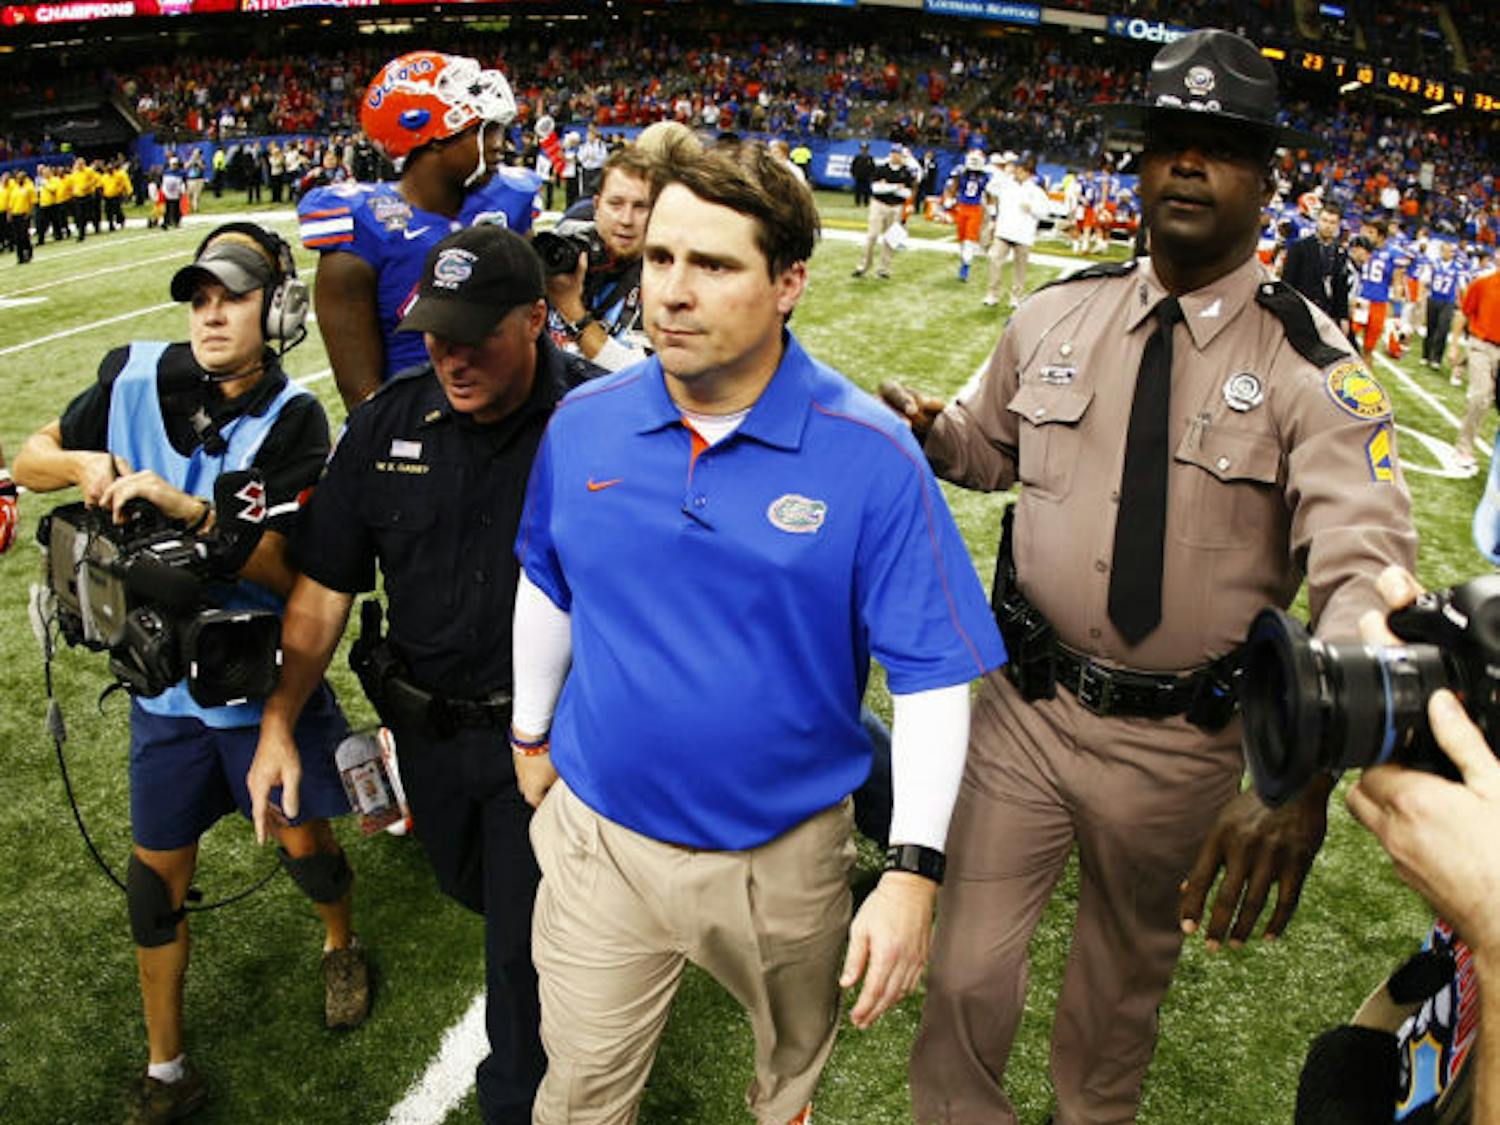 Coach Will Muschamp walks off the field following Florida’s 33-23 loss to Louisville in the Sugar Bowl&nbsp; on Jan. 2 at the Superdome in New Orleans. Muschamp owns an 18-8 record in two seasons with the Gators.